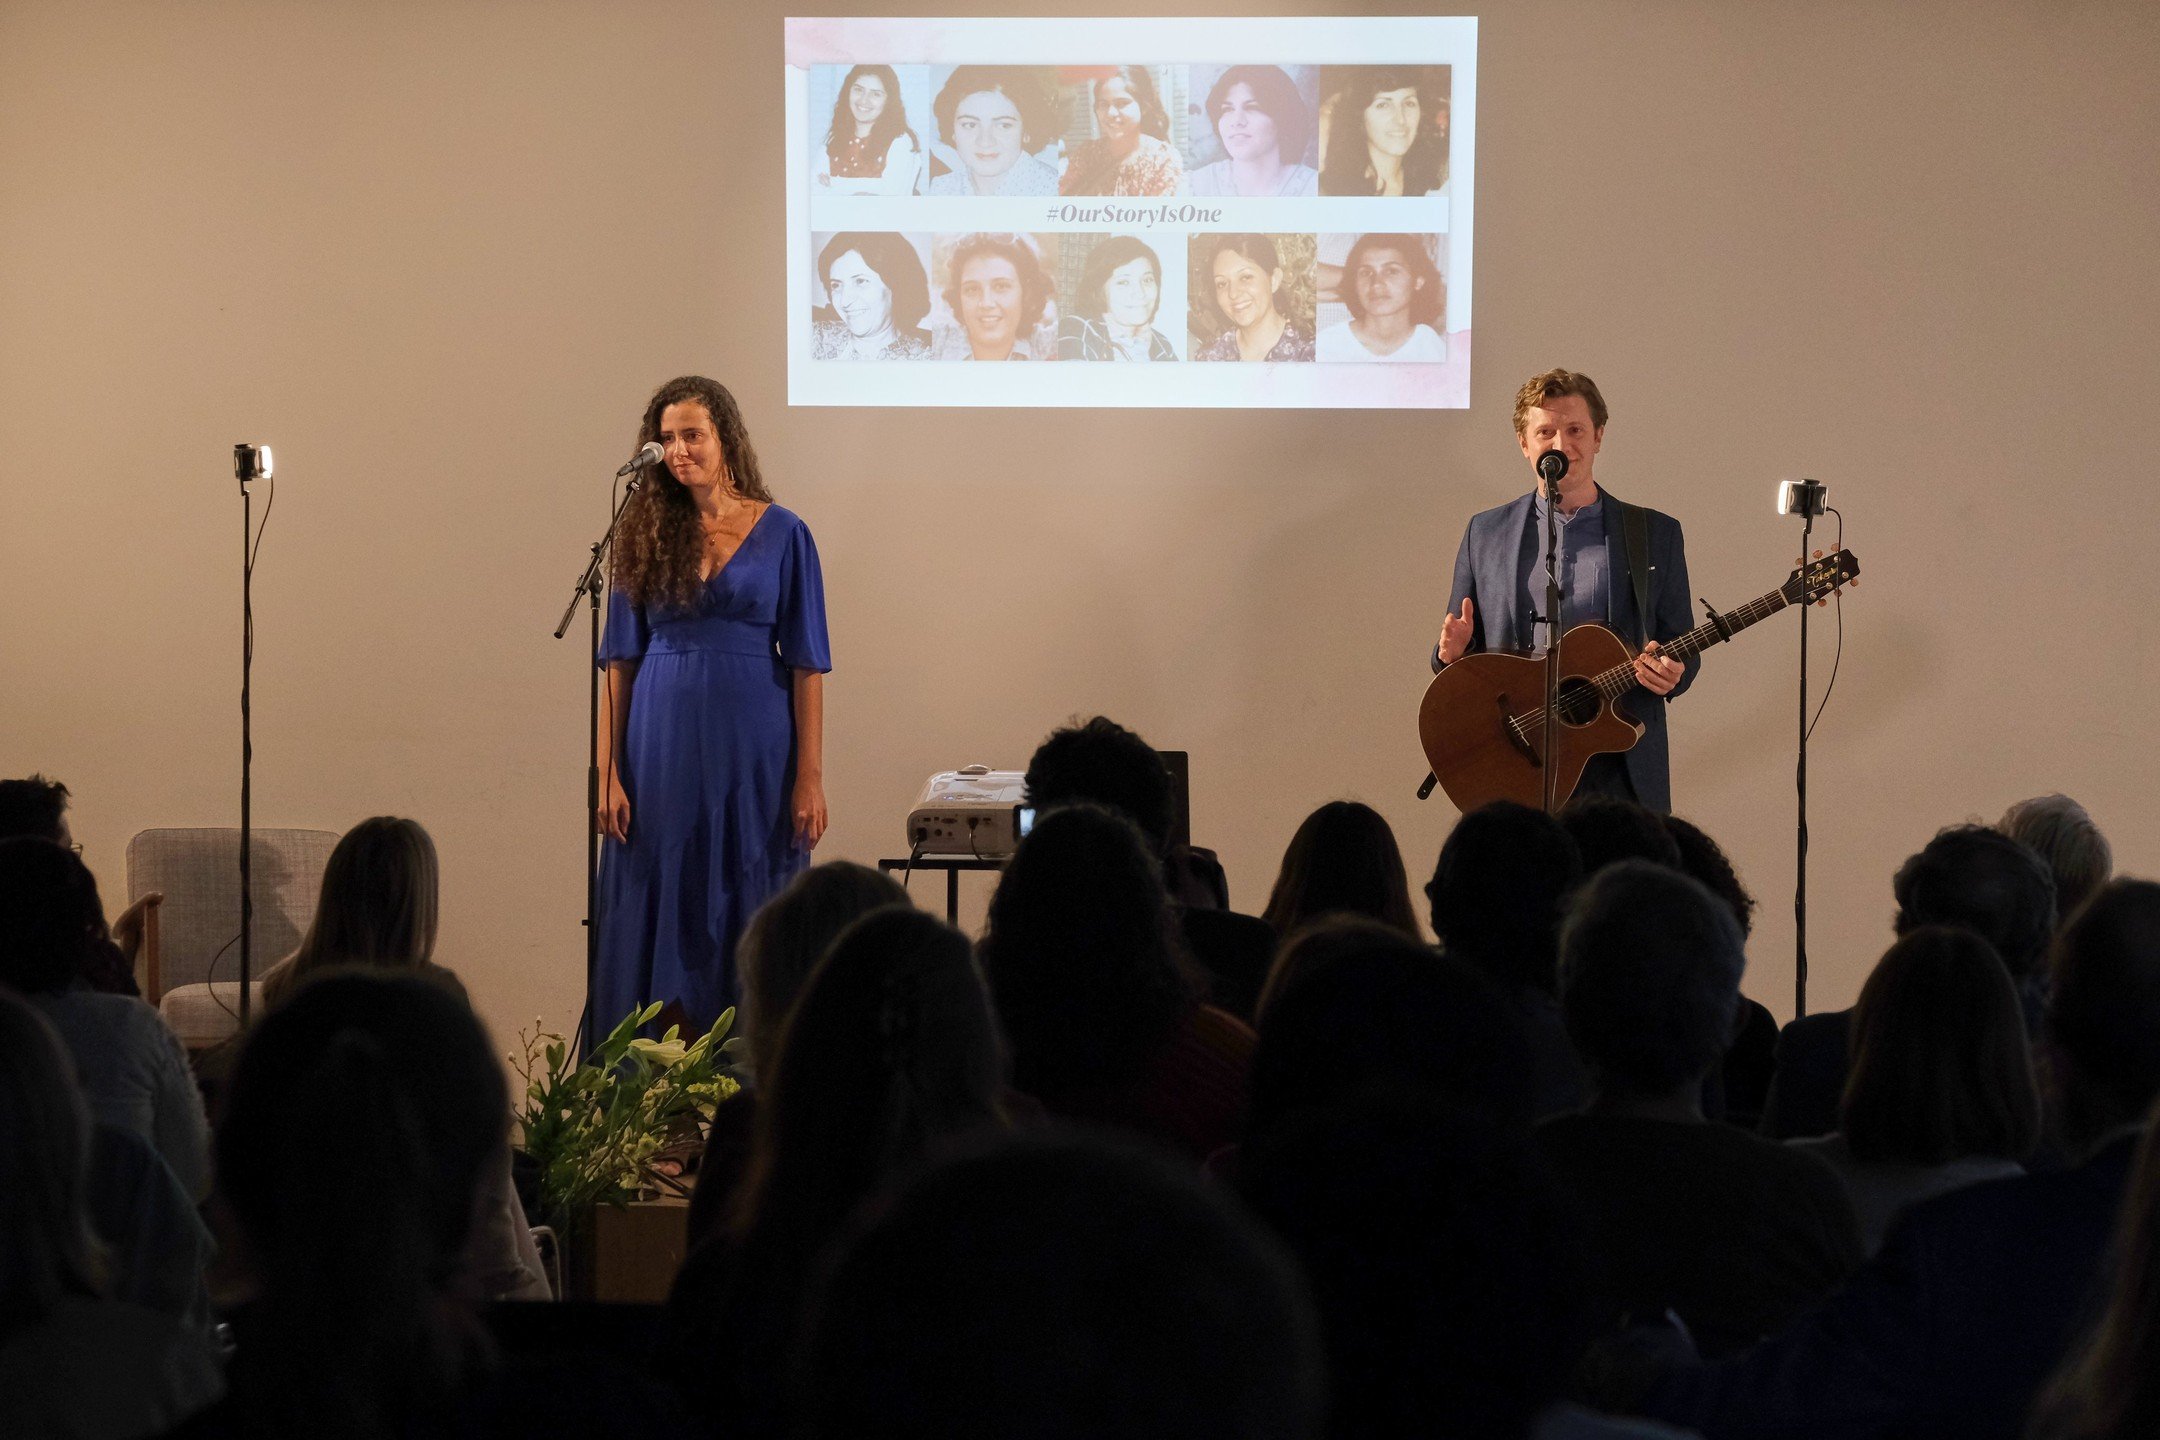 Touching concert in Brussels with @lukeslott and @jasminemusica, hosted by Member of the European Parliament Leopoldo Lopez Gil. 

Their performance, in memory of the 40th anniversary of the execution of 10 Bah&aacute;'&iacute; women of shiraz, reson